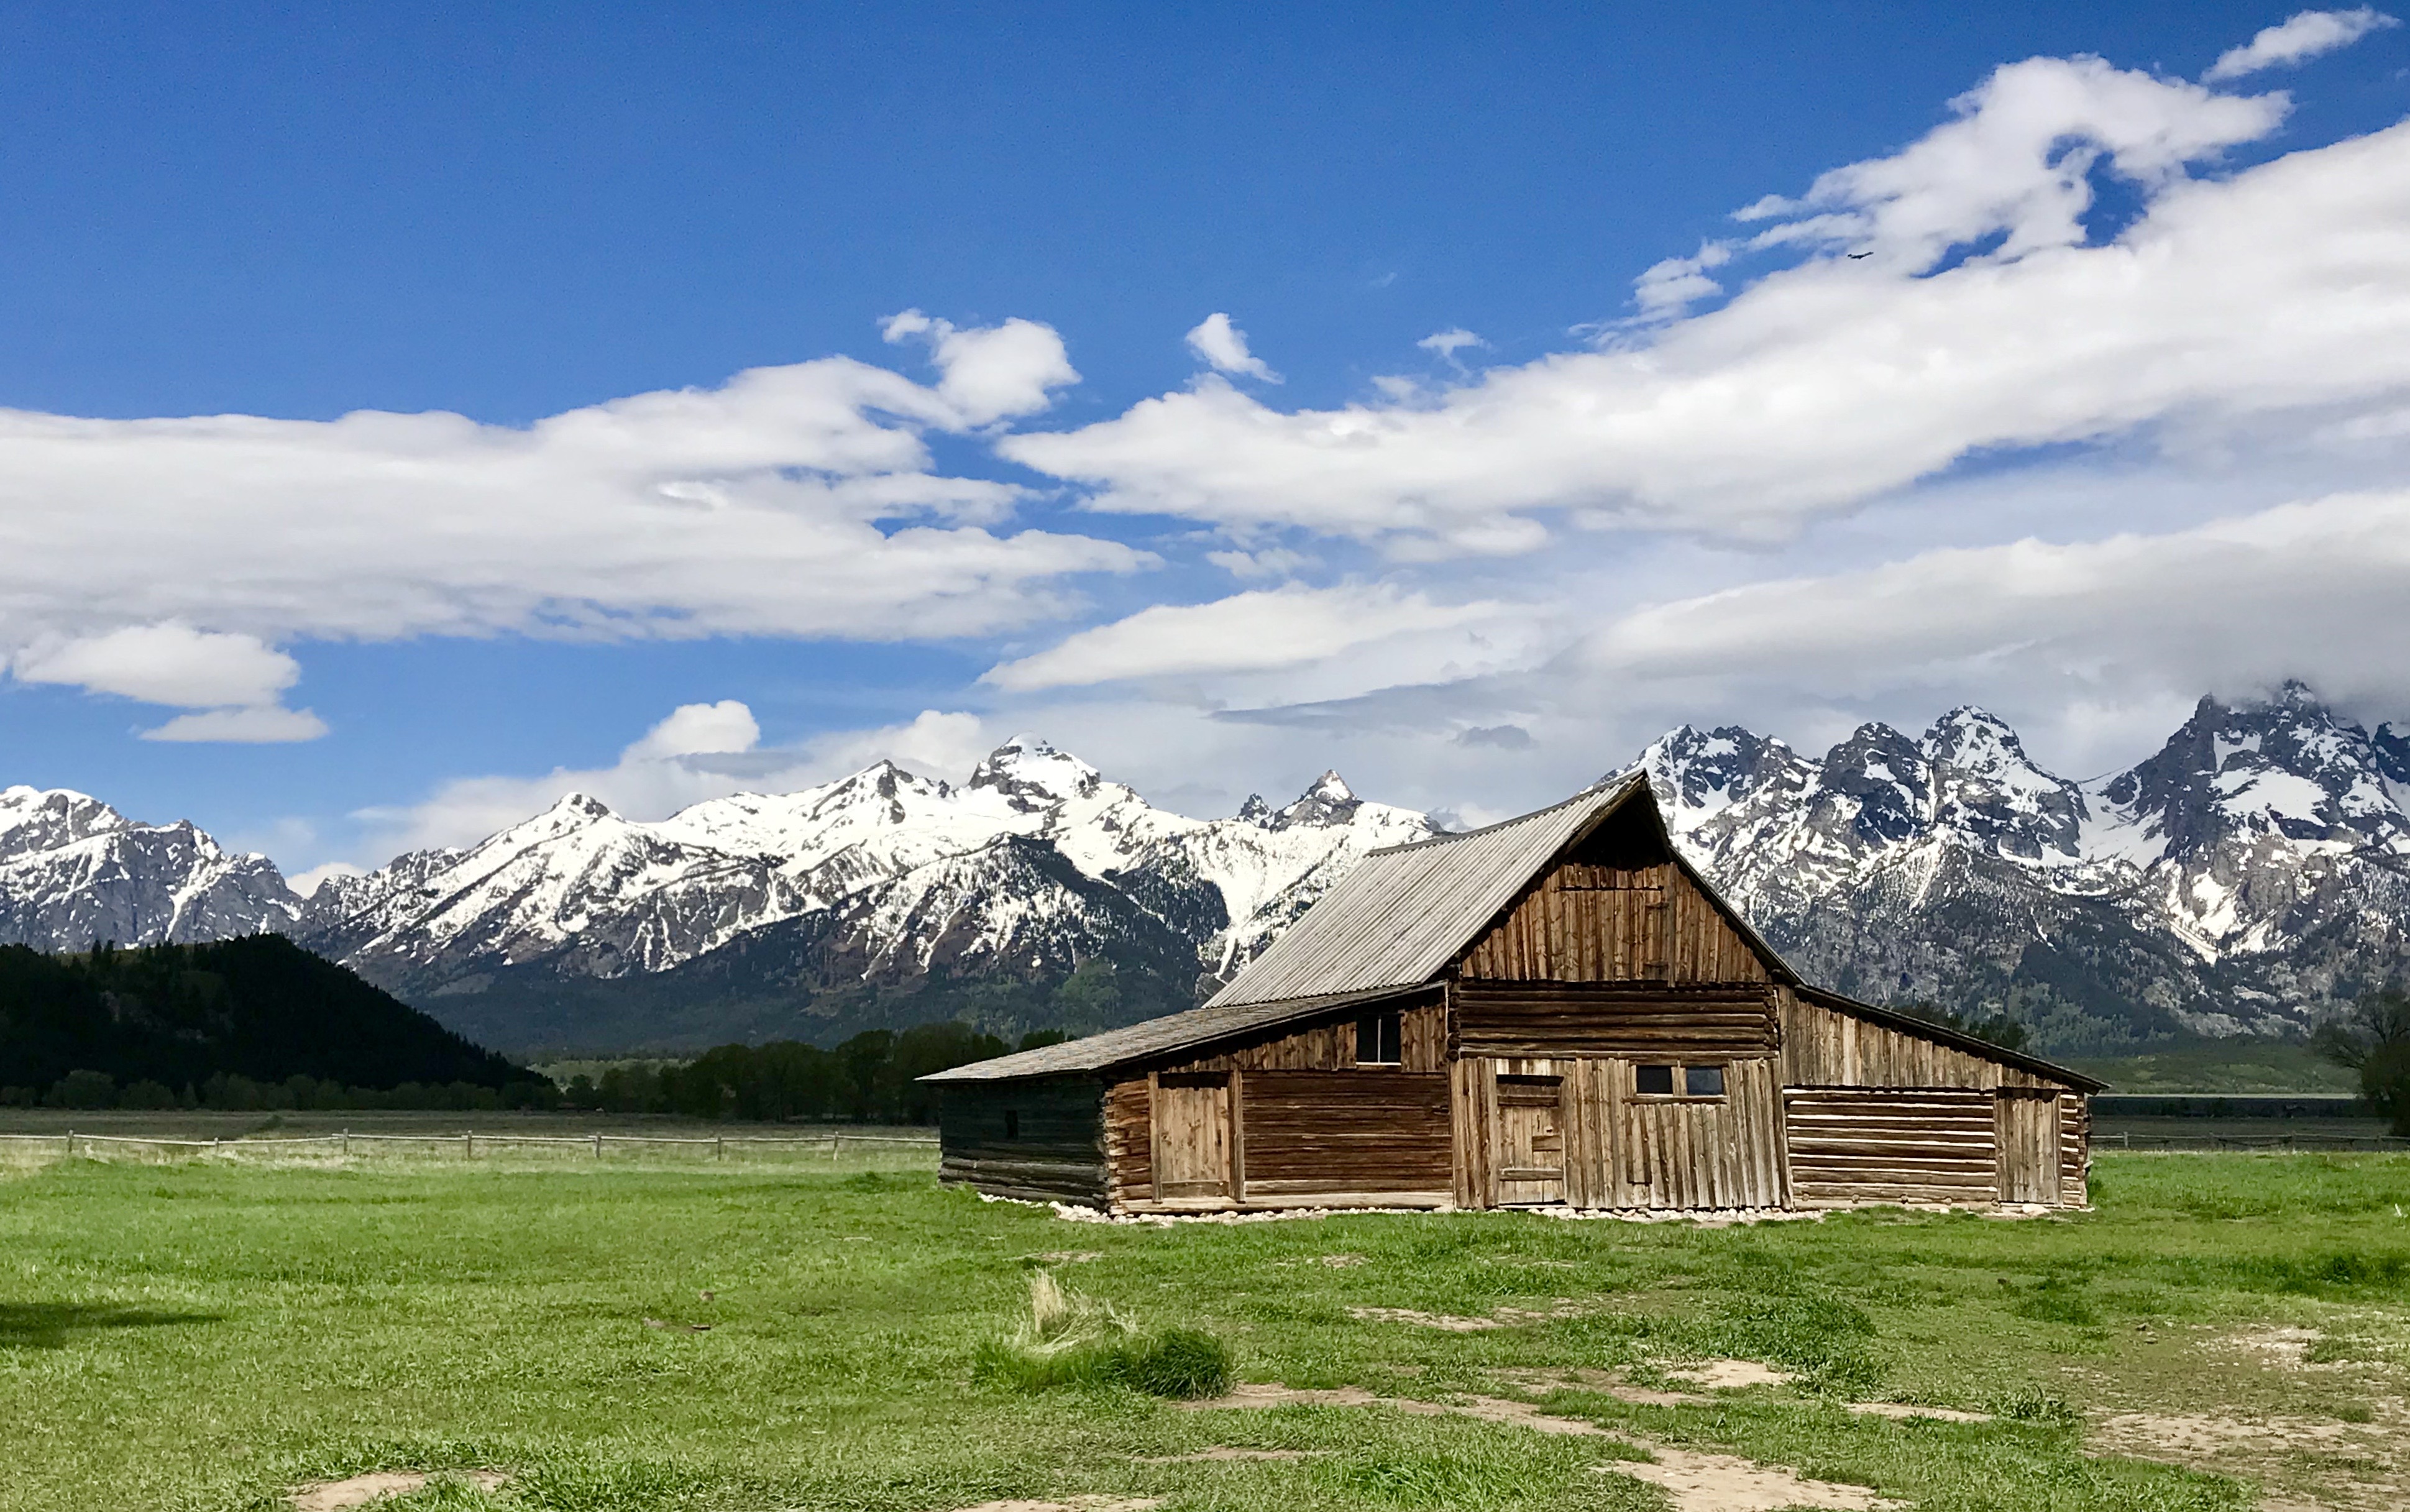 5-Day Yellowstone and Grand Teton National Park Tour from Bozeman